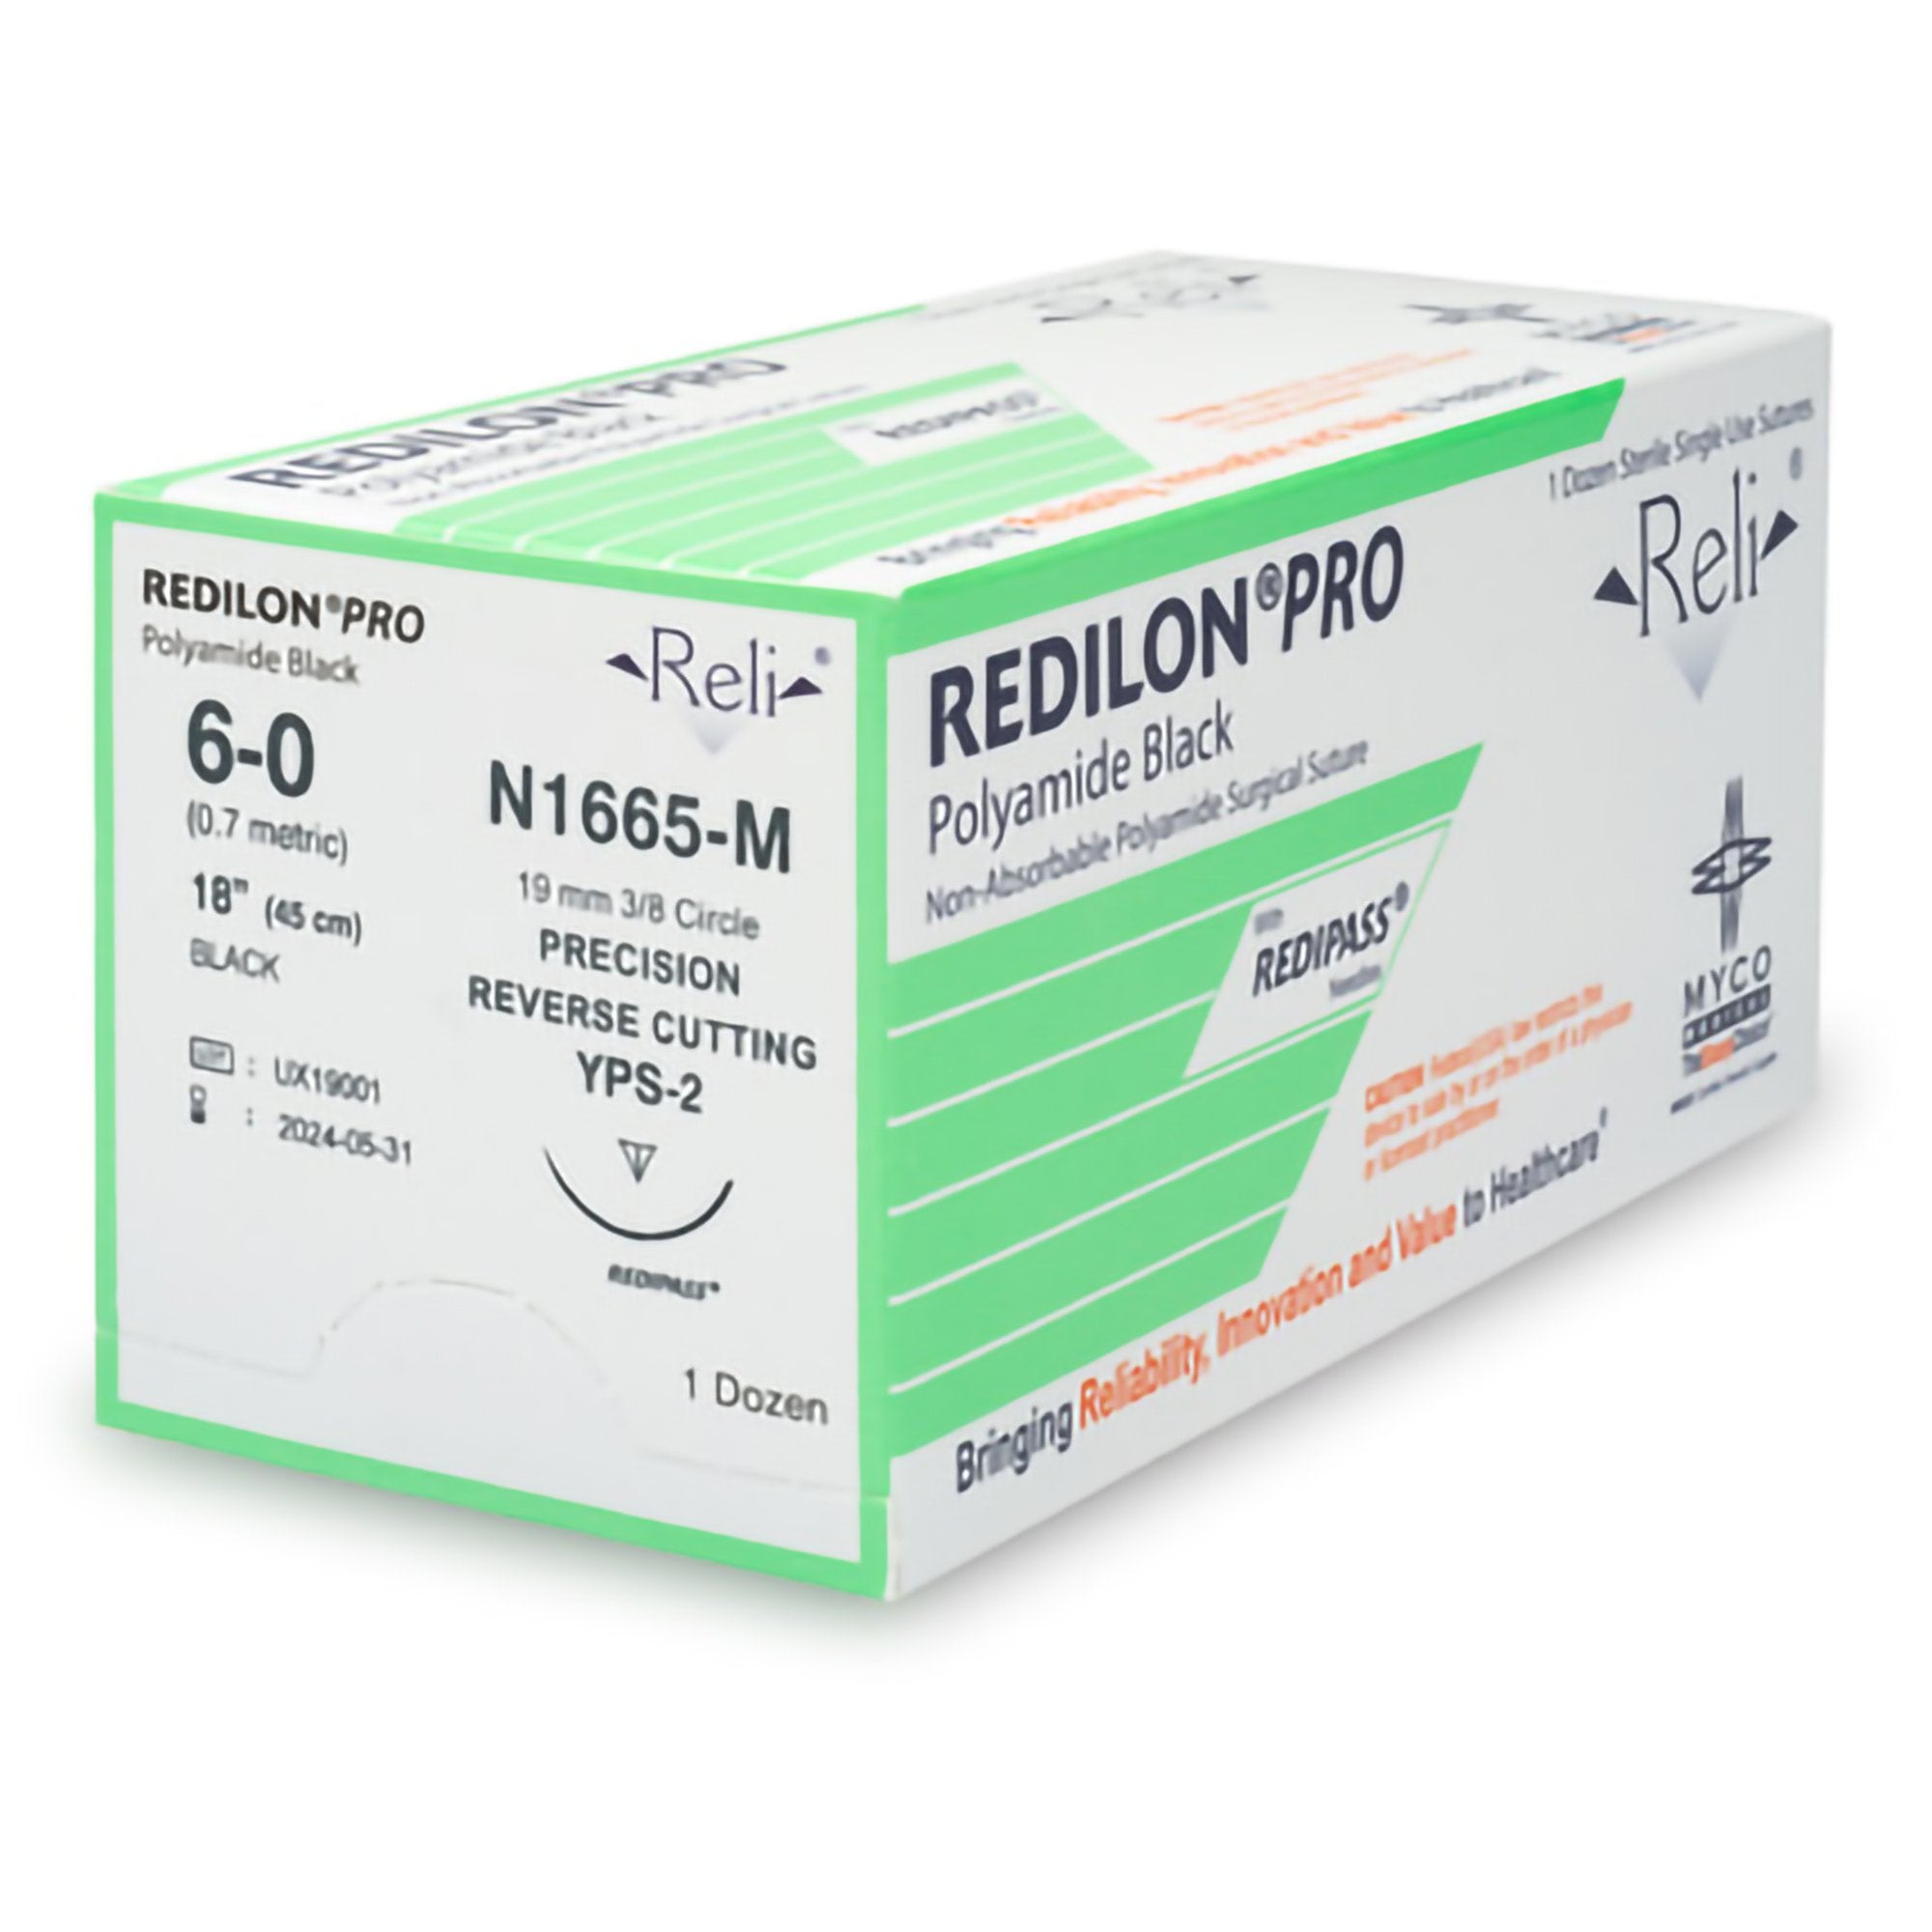 Nonabsorbable Suture with Needle Reli Redilon Nylon MPS-3 3/8 Circle Conventional Cutting Needle Size 6 - 0 Monofilament